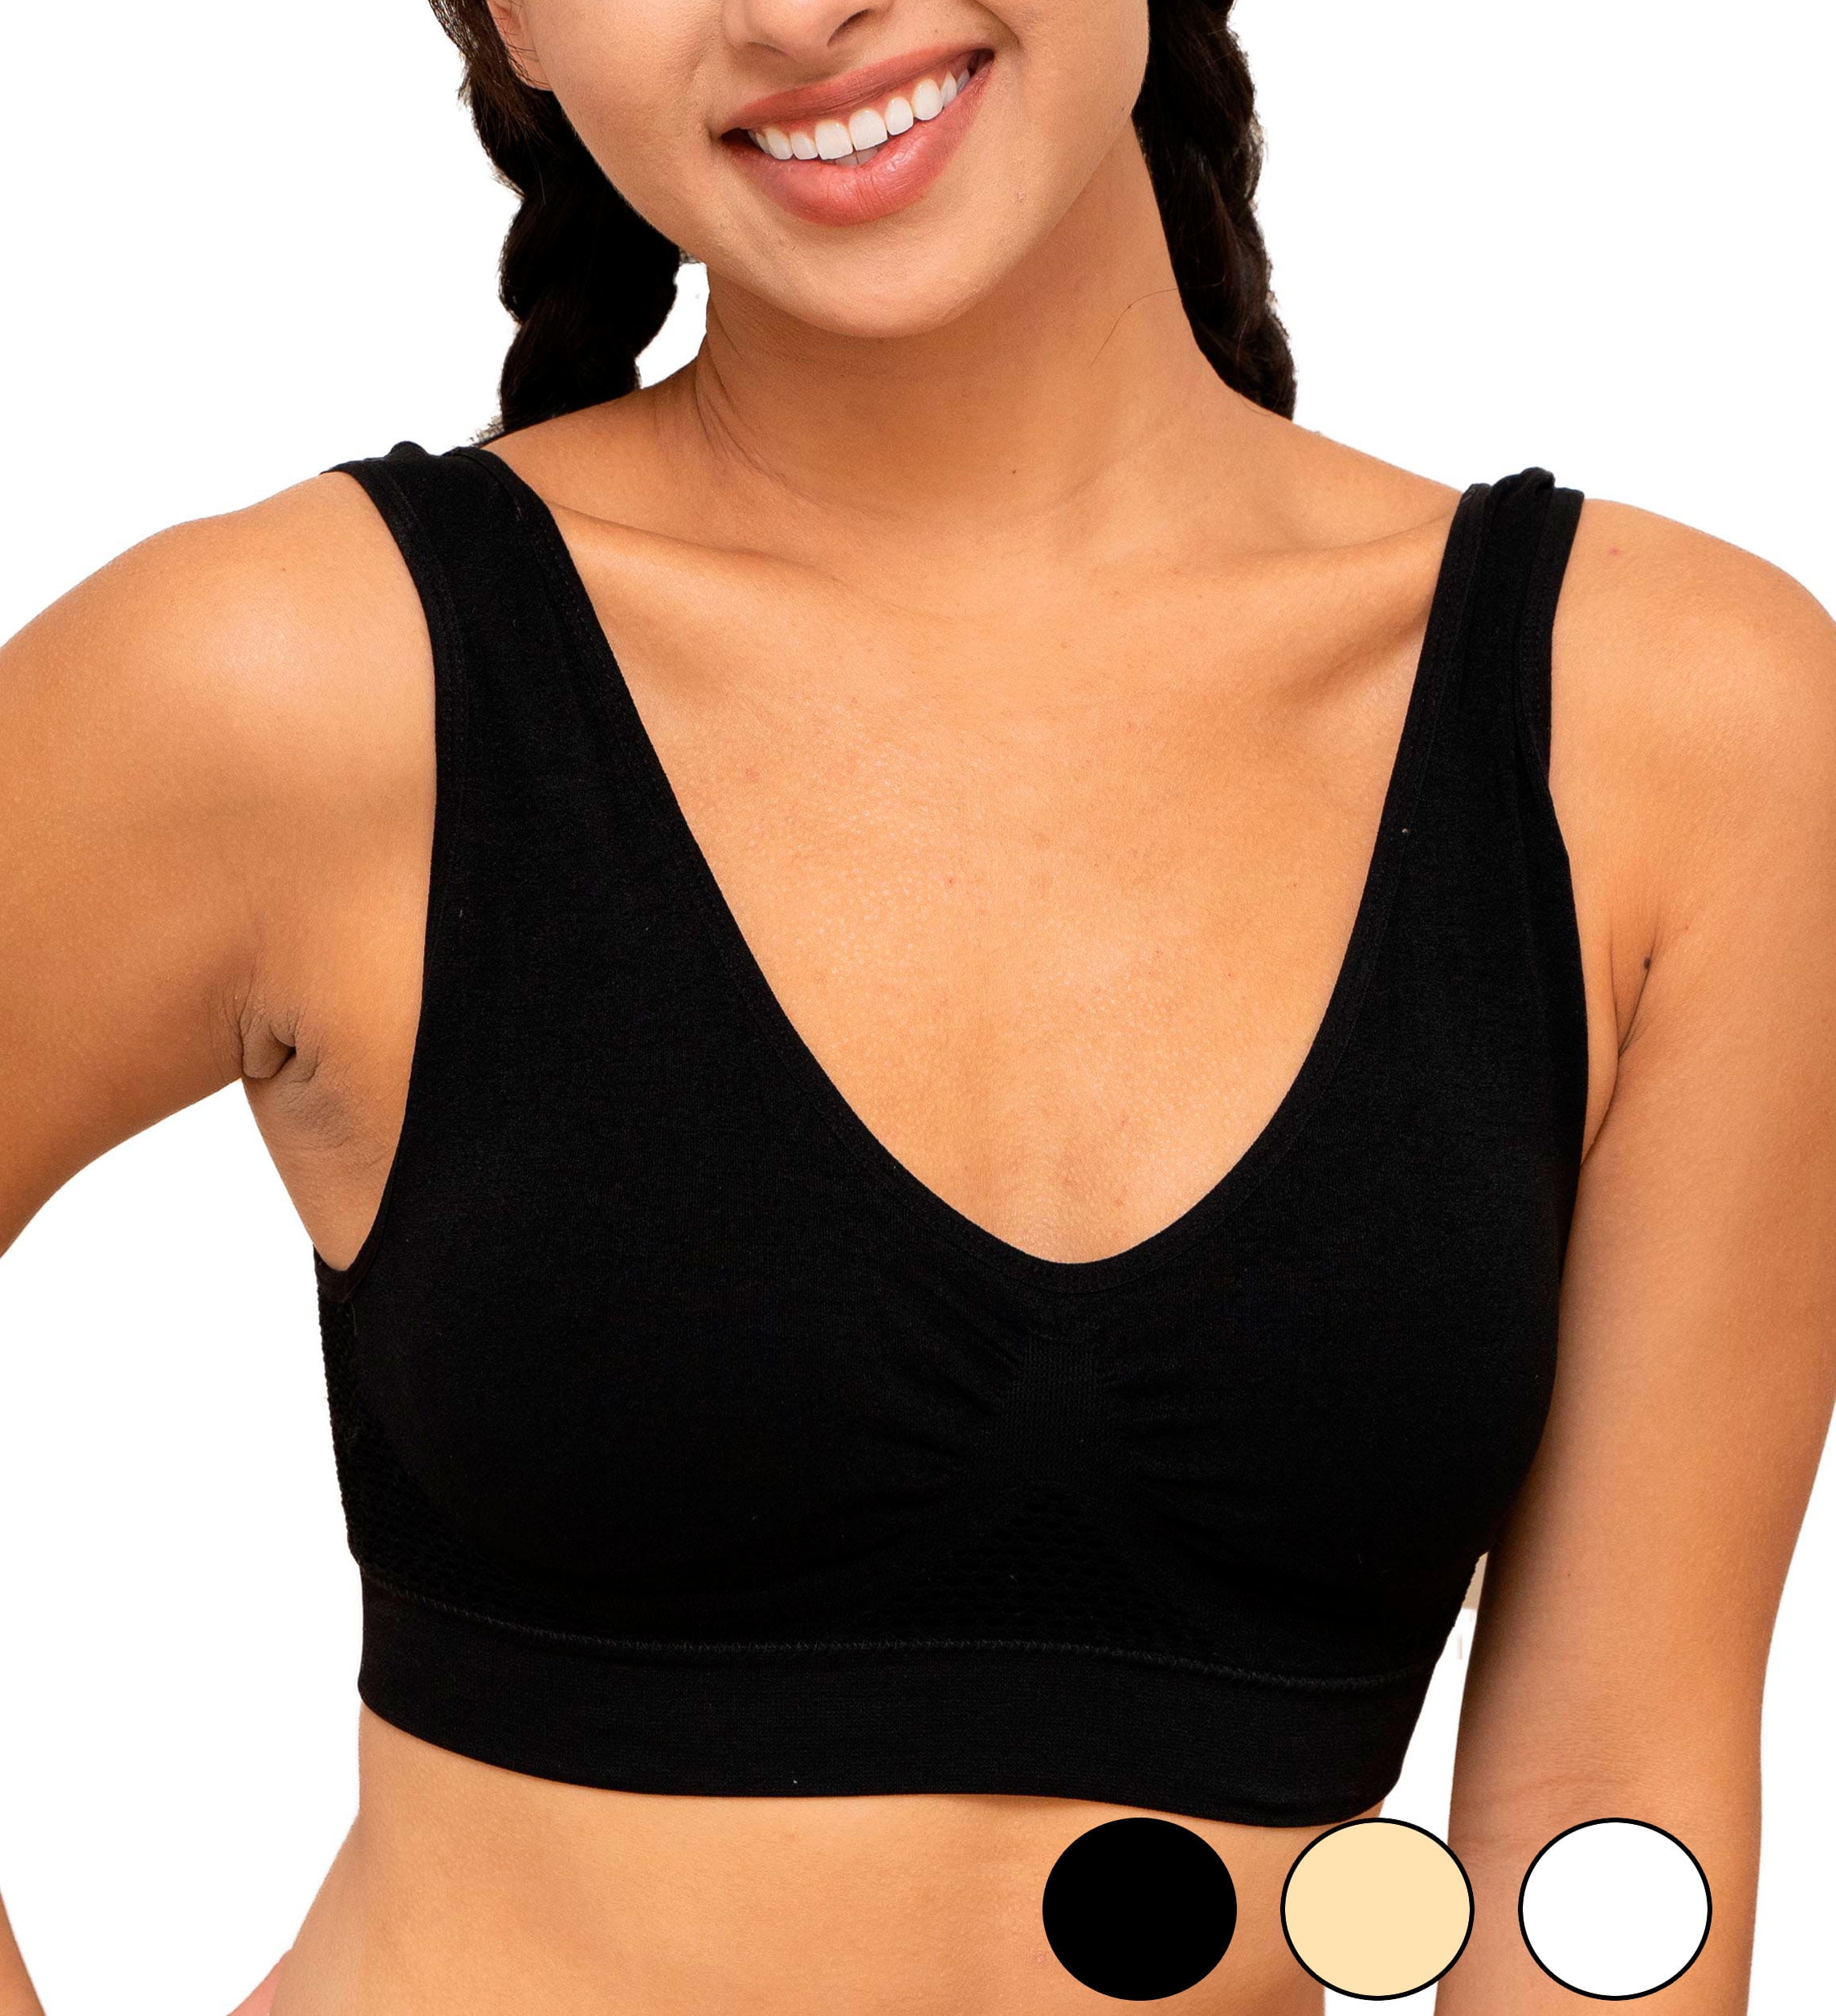 ChicCup Wireless&Seamless Bra: Freedom in Comfort, Confidence in Style